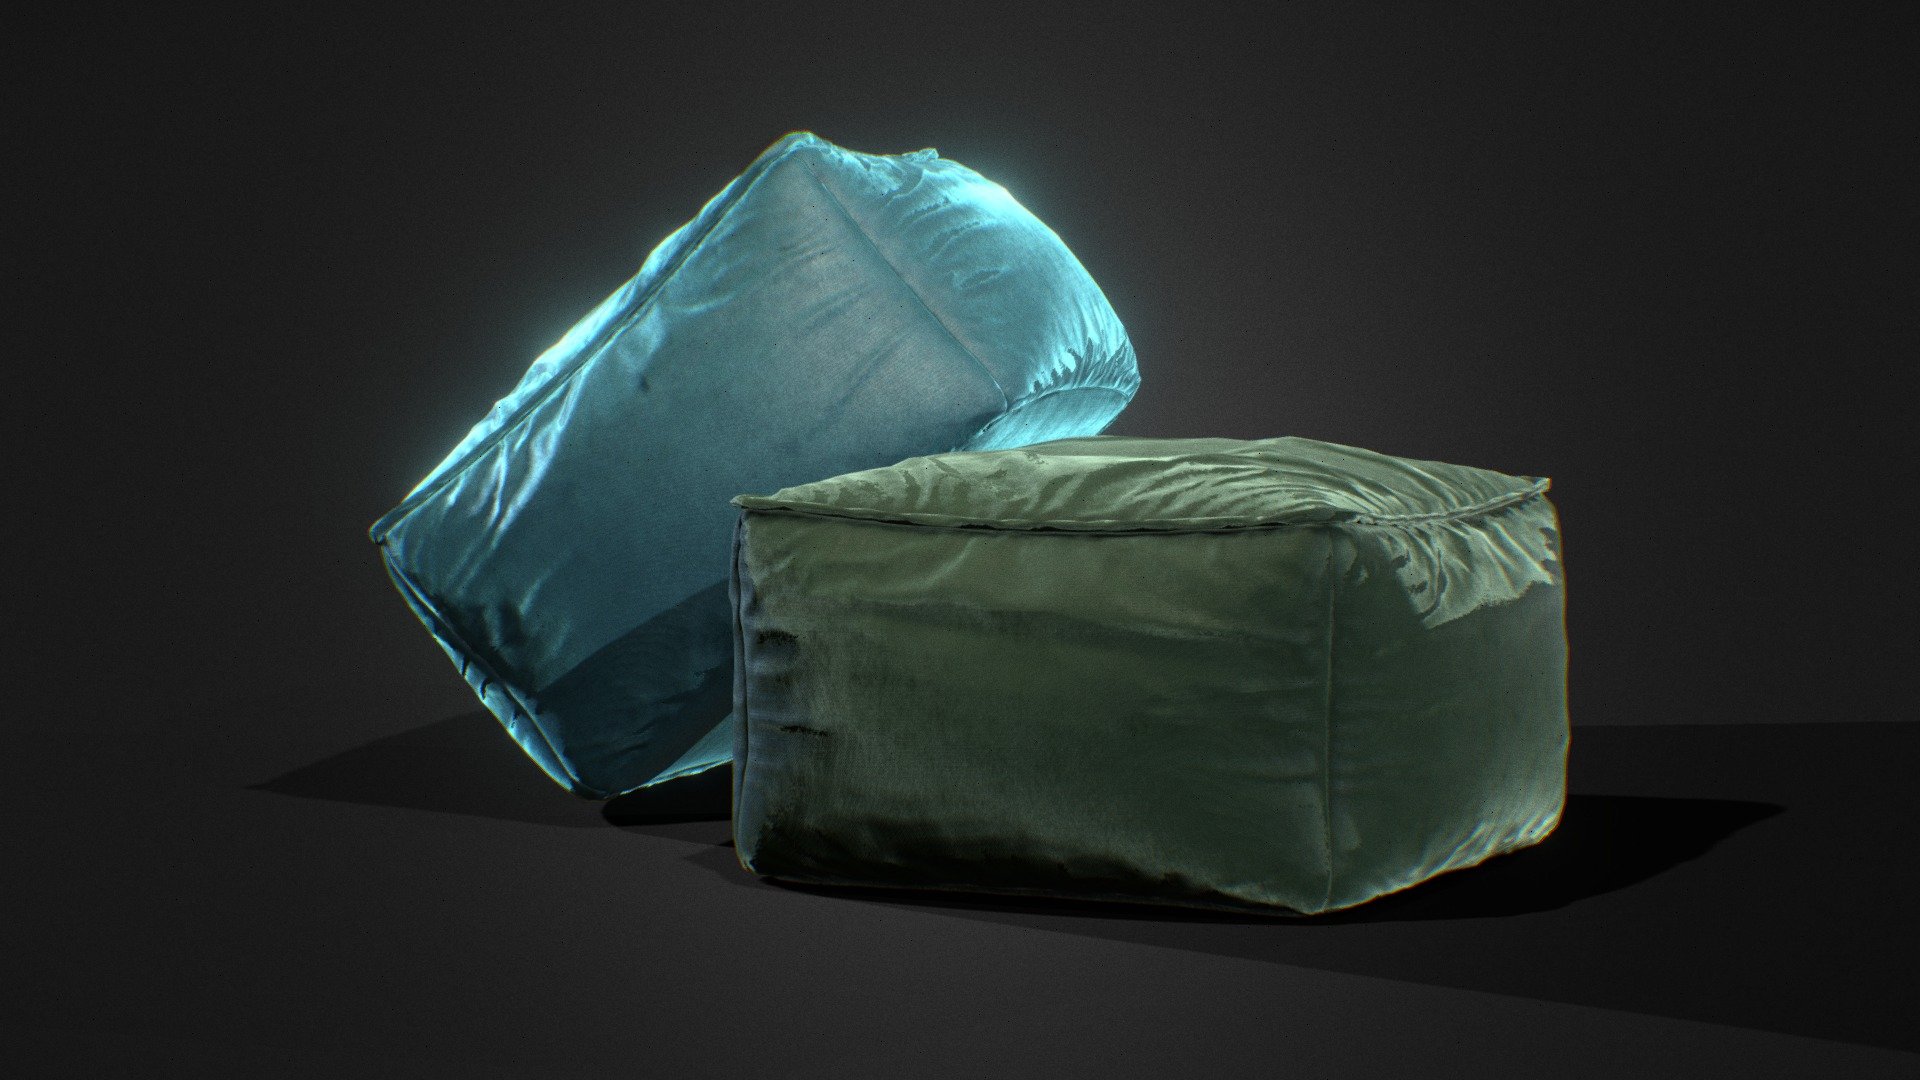 It is a 3d model of velvet Pouf for using as living-room furniture. It is can be used as a seating padded cushion in games and many other interior render scenes.

This model is created in 3ds Max and textured in Substance Painter.

This model is made in real proportions.

High quality of textures are available to download.

Metal-ness workflow- Base Color, Normal, Ambient Occlusion and Roughness Textures 3d model